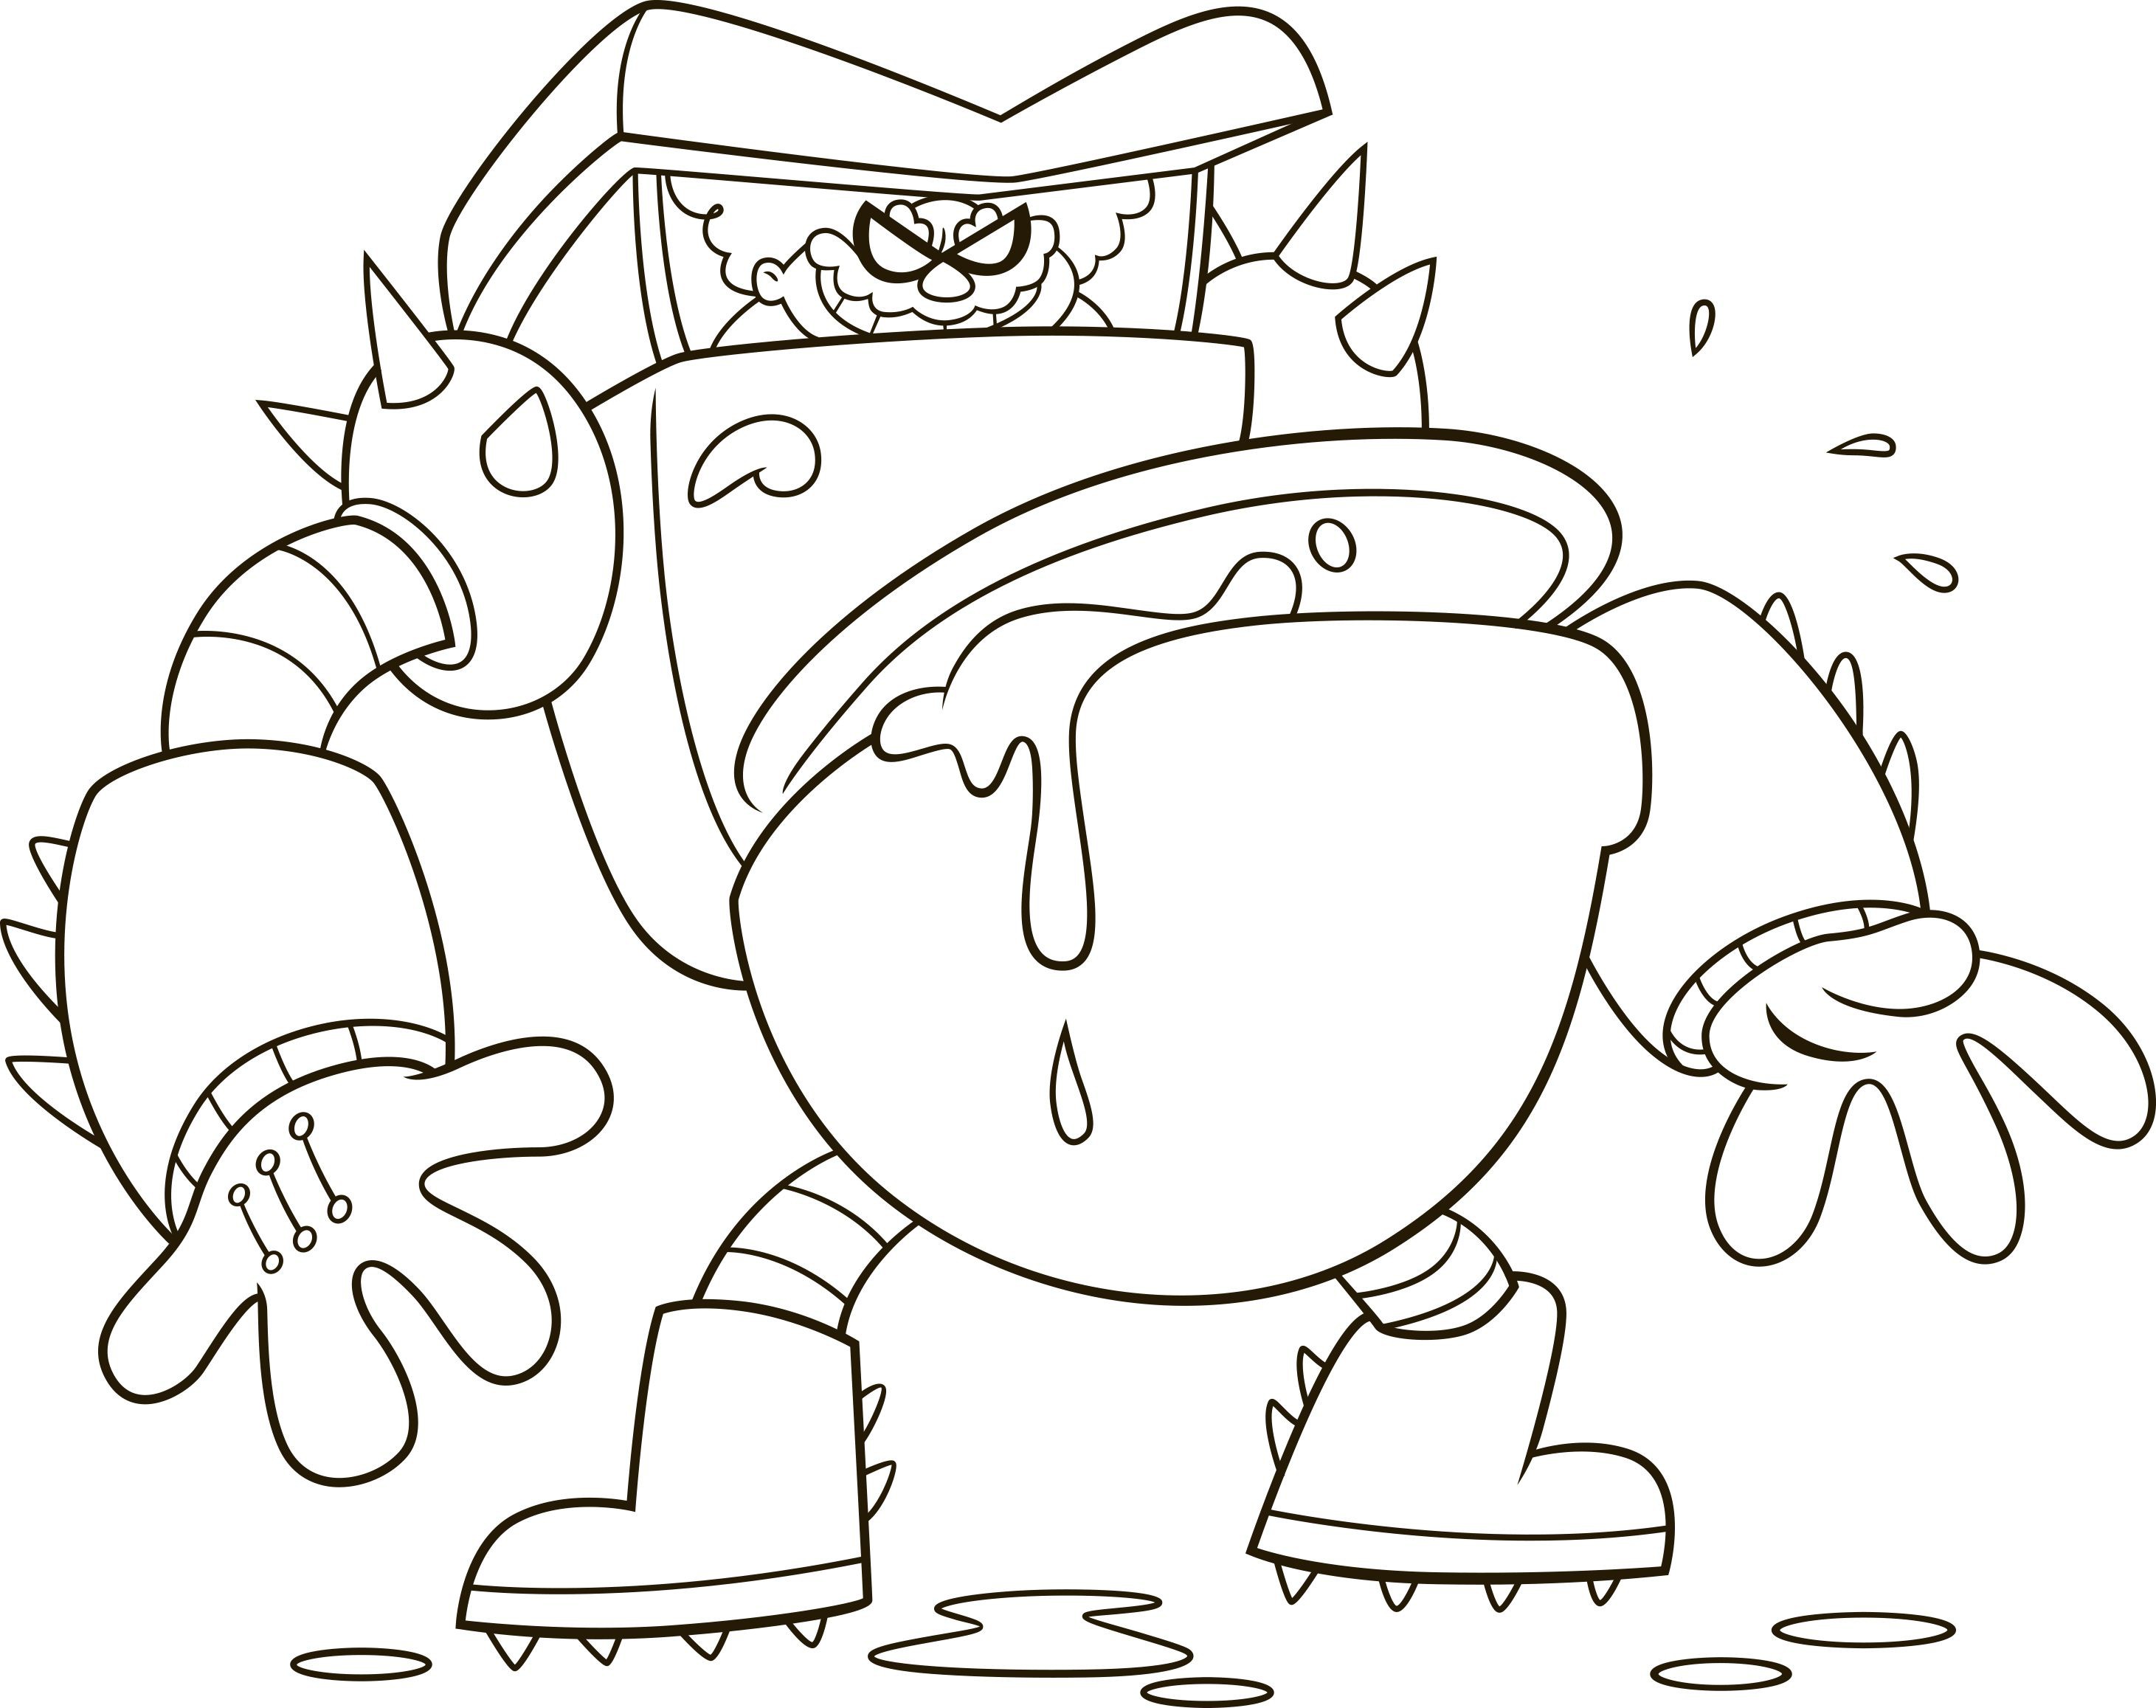 Captain Underpants Turbo Toilet 2000 Coloring Page captainunderpantsHE captainunderpants coloringpage kids movies